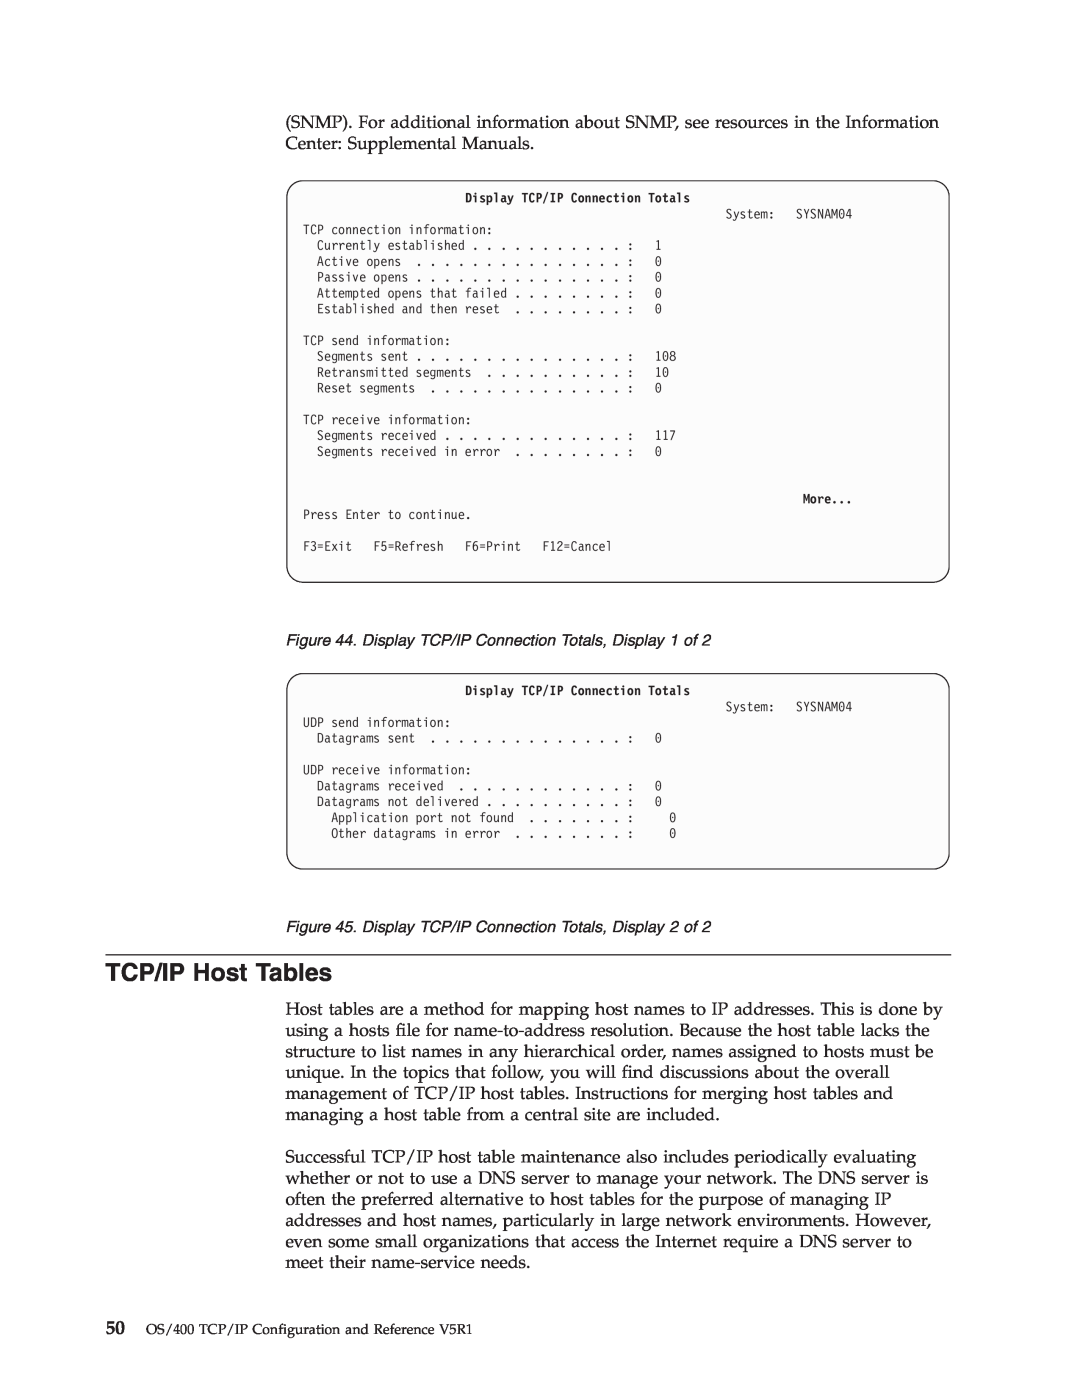 IBM SC41-5420-04 manual TCP/IP Host Tables, Display TCP/IP Connection Totals, More 